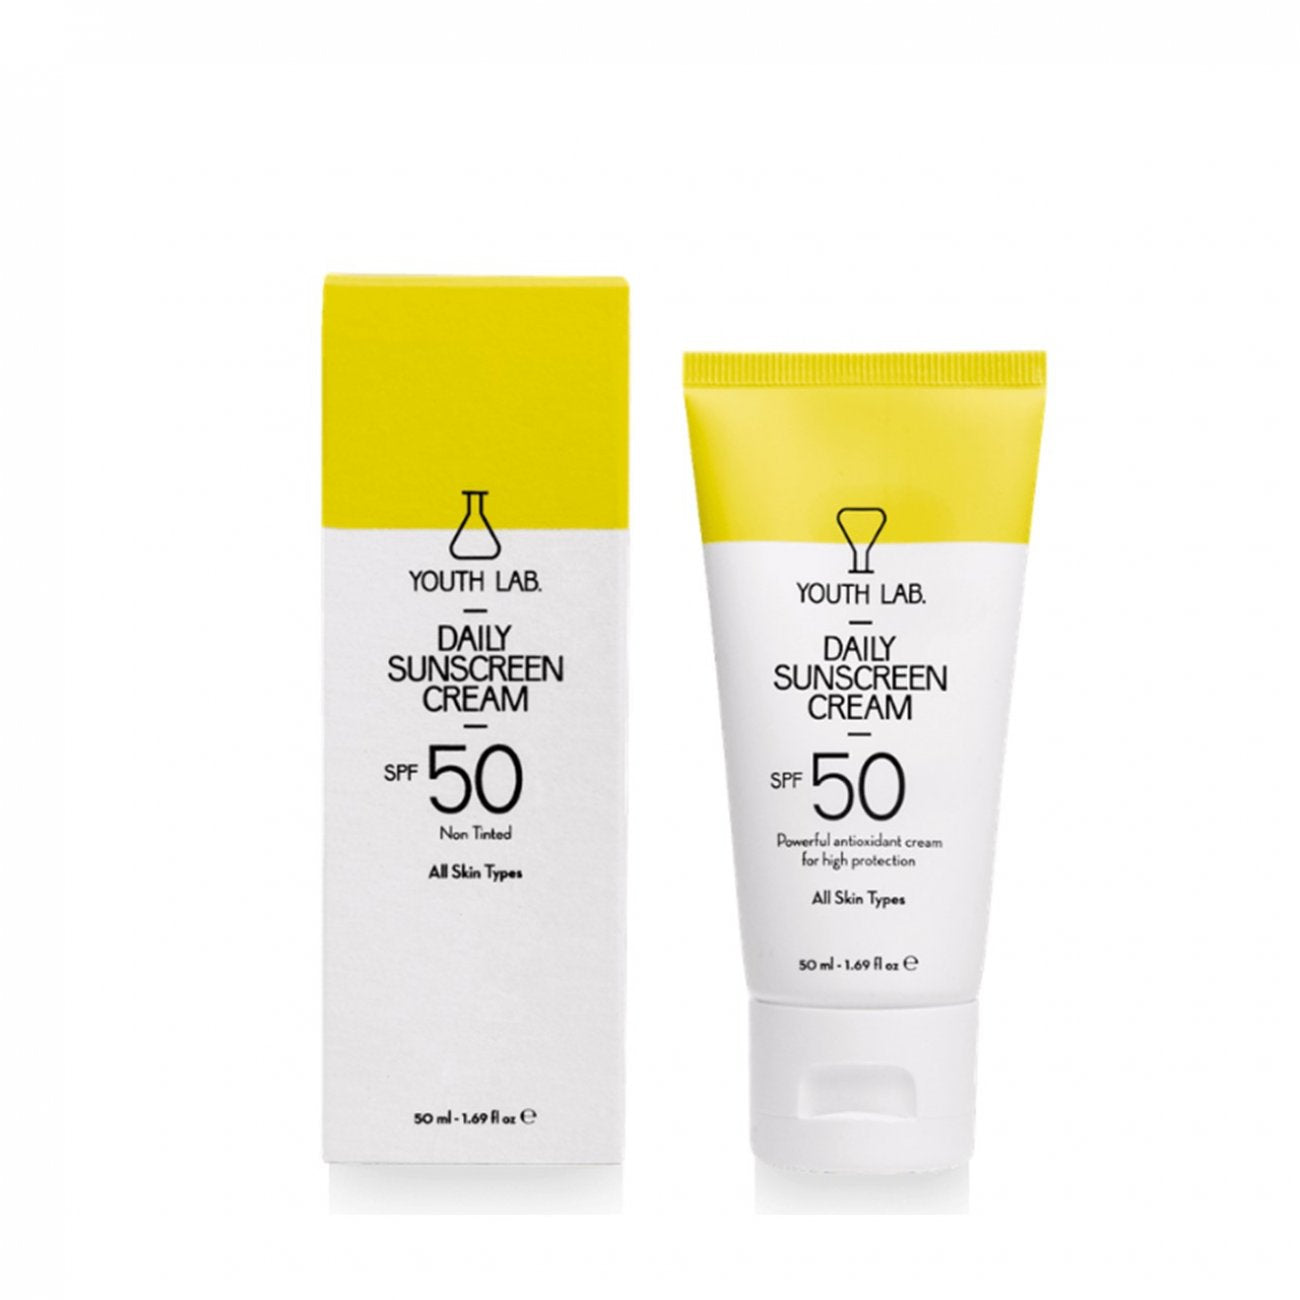 YOUTH LAB Daily Sunscreen Cream SPF50 Non Tinted 50ml